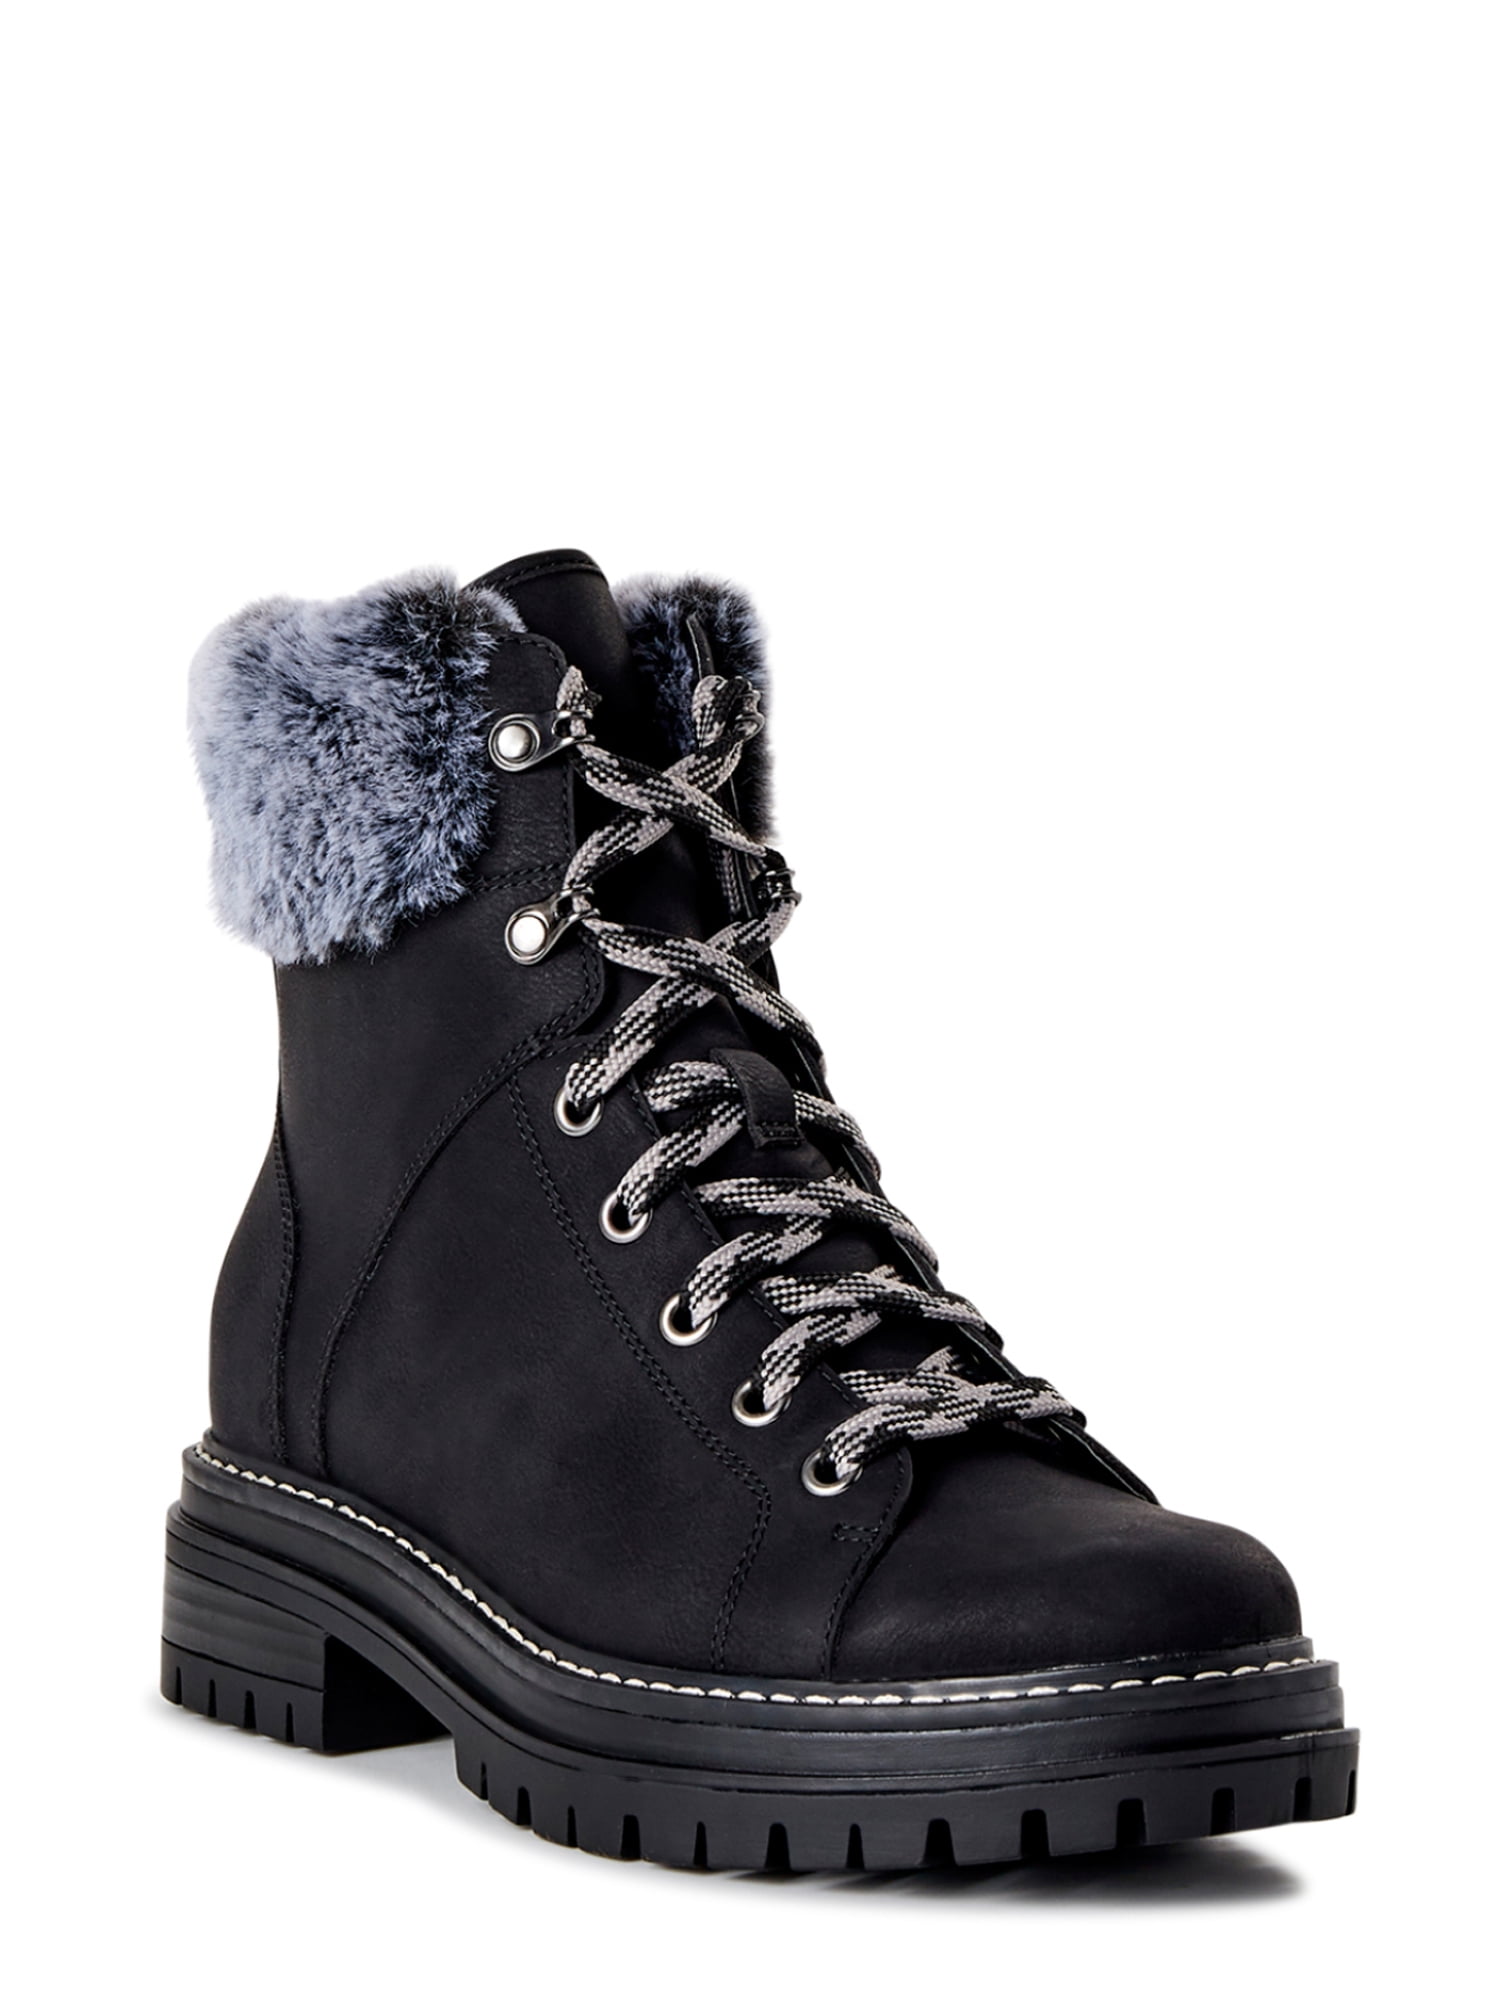 Time and Tru Women's Hiker Boots